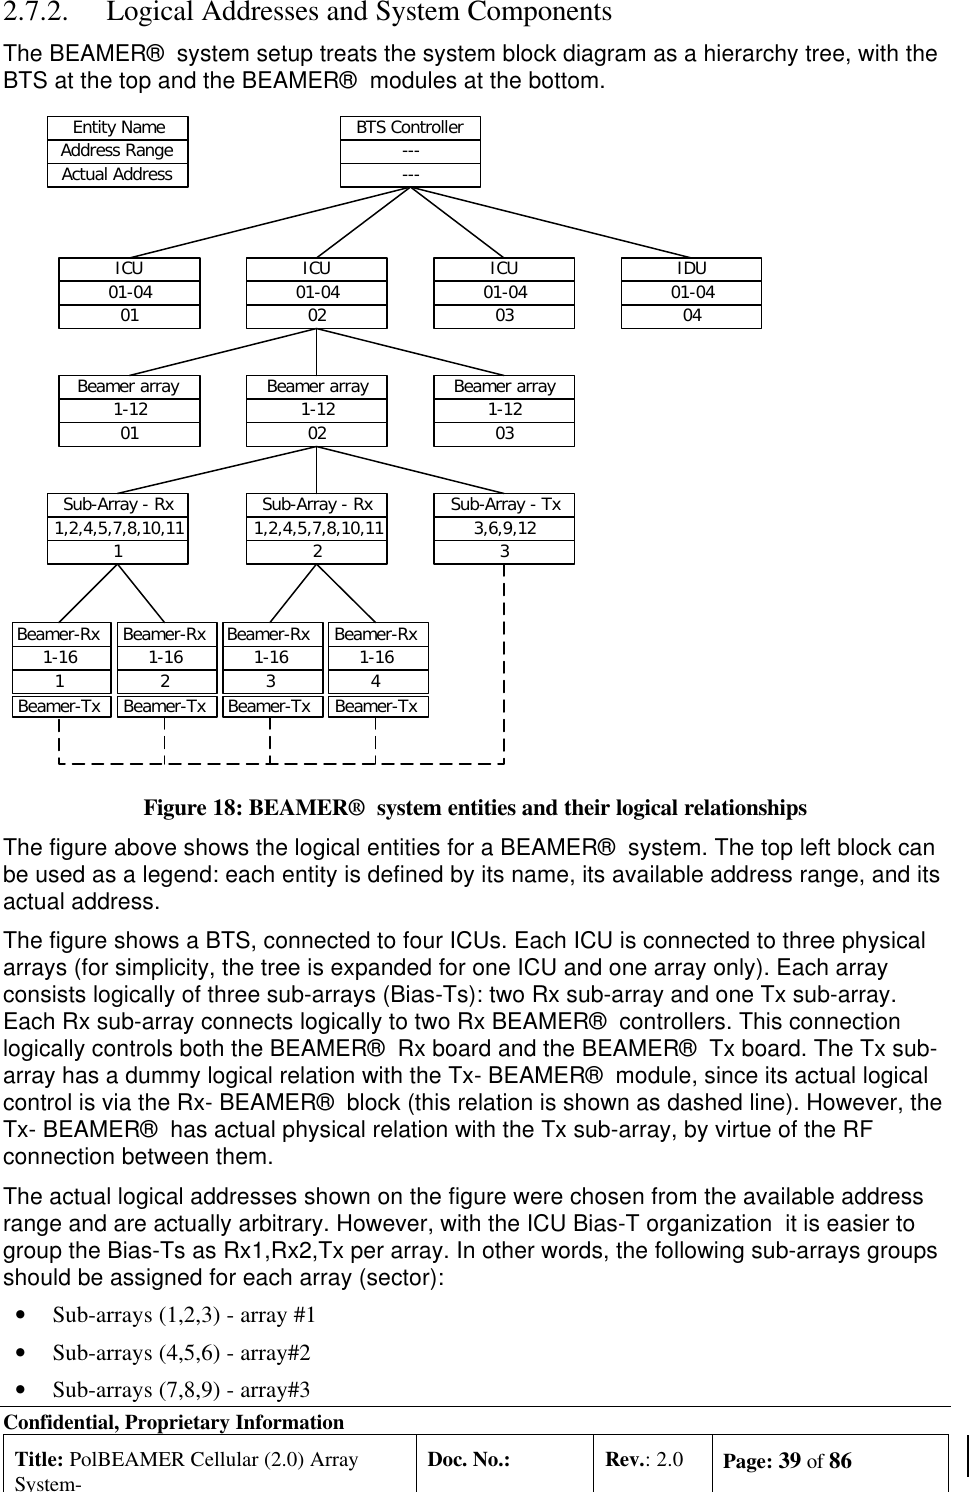 Confidential, Proprietary InformationTitle: PolBEAMER Cellular (2.0) ArraySystem-Doc. No.: Rev.: 2.0 Page: 39 of 862.7.2. Logical Addresses and System ComponentsThe BEAMER®  system setup treats the system block diagram as a hierarchy tree, with theBTS at the top and the BEAMER®  modules at the bottom.Figure 18: BEAMER®  system entities and their logical relationshipsThe figure above shows the logical entities for a BEAMER®  system. The top left block canbe used as a legend: each entity is defined by its name, its available address range, and itsactual address.The figure shows a BTS, connected to four ICUs. Each ICU is connected to three physicalarrays (for simplicity, the tree is expanded for one ICU and one array only). Each arrayconsists logically of three sub-arrays (Bias-Ts): two Rx sub-array and one Tx sub-array.Each Rx sub-array connects logically to two Rx BEAMER®  controllers. This connectionlogically controls both the BEAMER®  Rx board and the BEAMER®  Tx board. The Tx sub-array has a dummy logical relation with the Tx- BEAMER®  module, since its actual logicalcontrol is via the Rx- BEAMER®  block (this relation is shown as dashed line). However, theTx- BEAMER®  has actual physical relation with the Tx sub-array, by virtue of the RFconnection between them.The actual logical addresses shown on the figure were chosen from the available addressrange and are actually arbitrary. However, with the ICU Bias-T organization  it is easier togroup the Bias-Ts as Rx1,Rx2,Tx per array. In other words, the following sub-arrays groupsshould be assigned for each array (sector):• Sub-arrays (1,2,3) - array #1• Sub-arrays (4,5,6) - array#2• Sub-arrays (7,8,9) - array#3Entity NameAddress RangeActual AddressBTS Controller------ICU01-0402ICU01-0401ICU01-0403IDU01-0404Beamer array1-1202Beamer array1-1203Beamer array1-1201Sub-Array - Rx1,2,4,5,7,8,10,112Sub-Array - Rx1,2,4,5,7,8,10,111Sub-Array - Tx3,6,9,123Beamer-Rx1-164Beamer-TxBeamer-Rx1-163Beamer-TxBeamer-Rx1-162Beamer-TxBeamer-Rx1-161Beamer-Tx